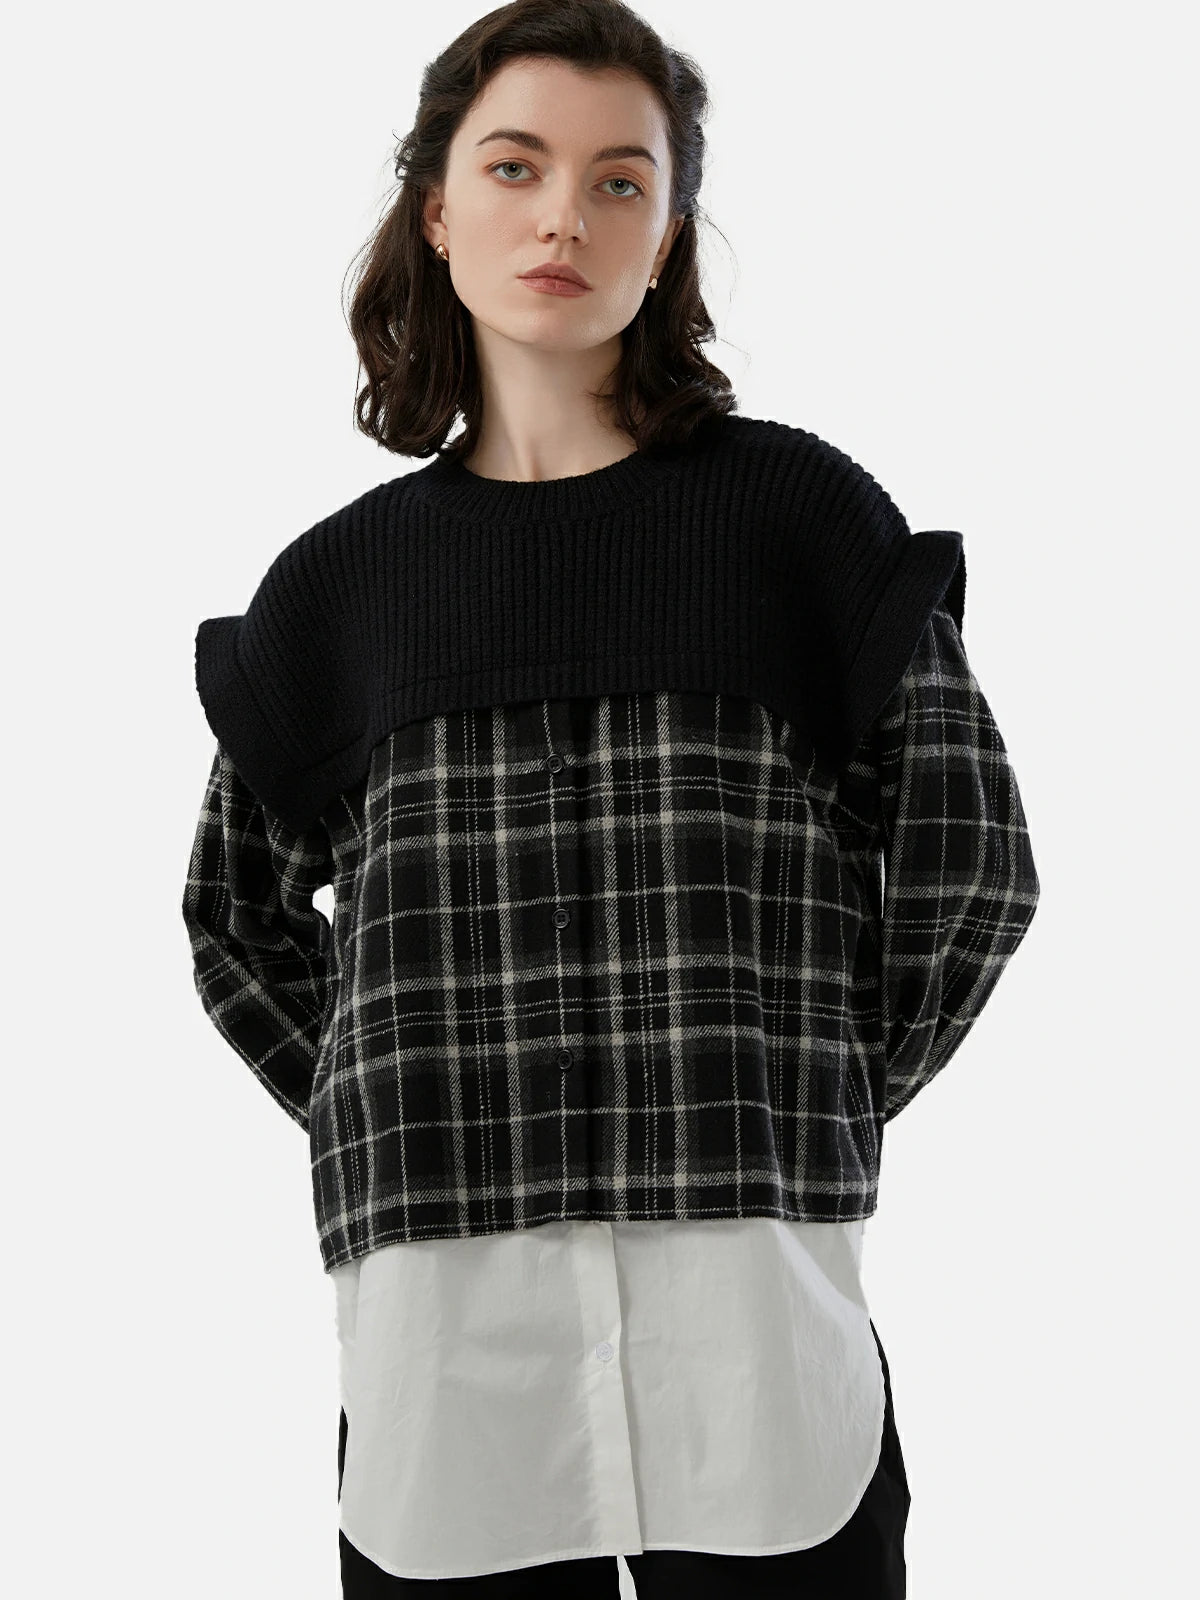 Ribbed round neck shirt combining wool and checkered fabric